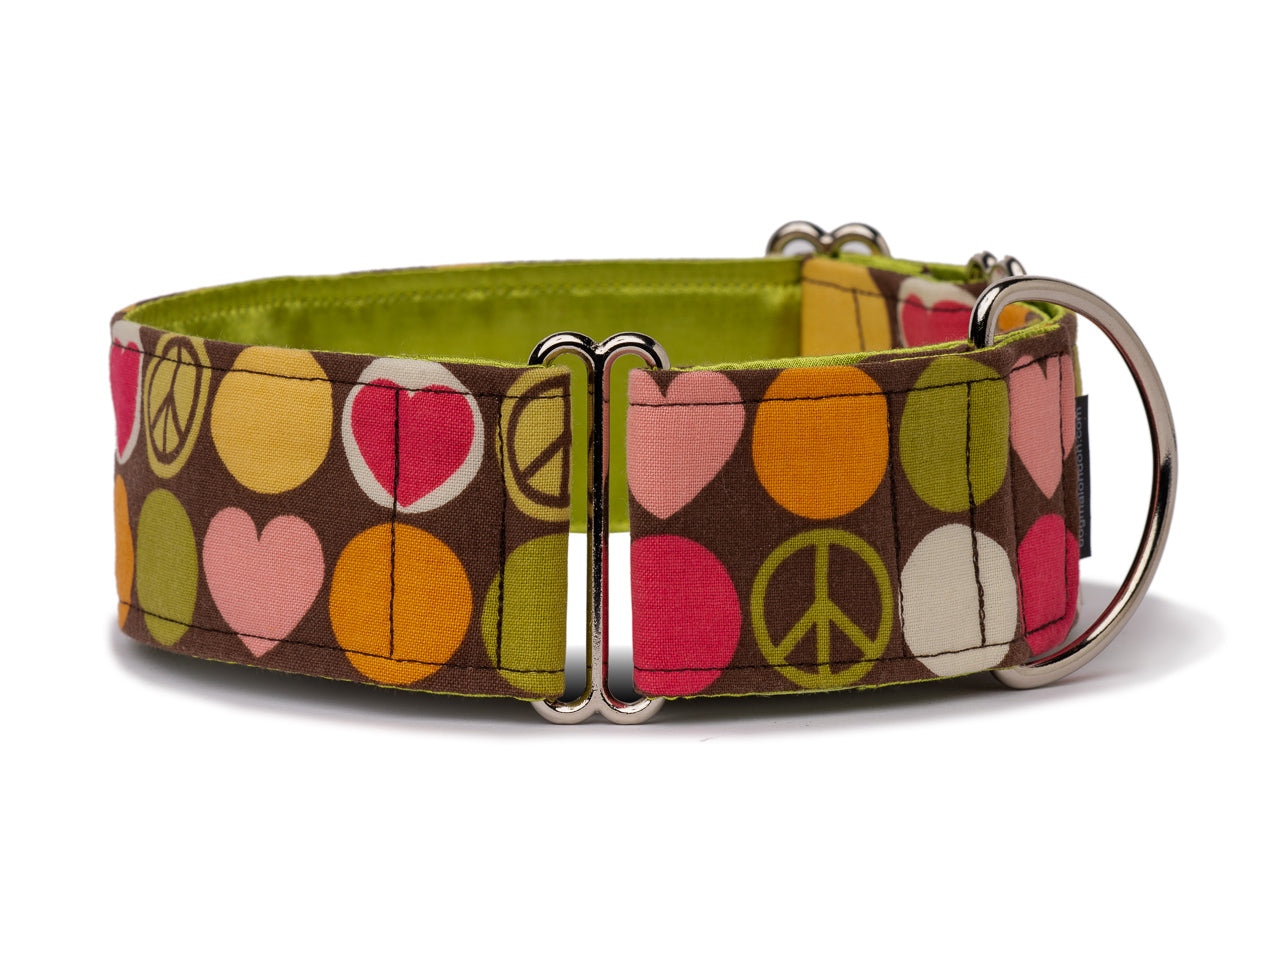 Mellow dots, hearts, and peace signs on warm brown are a groovy accessory for the peace-loving feel-good hound!